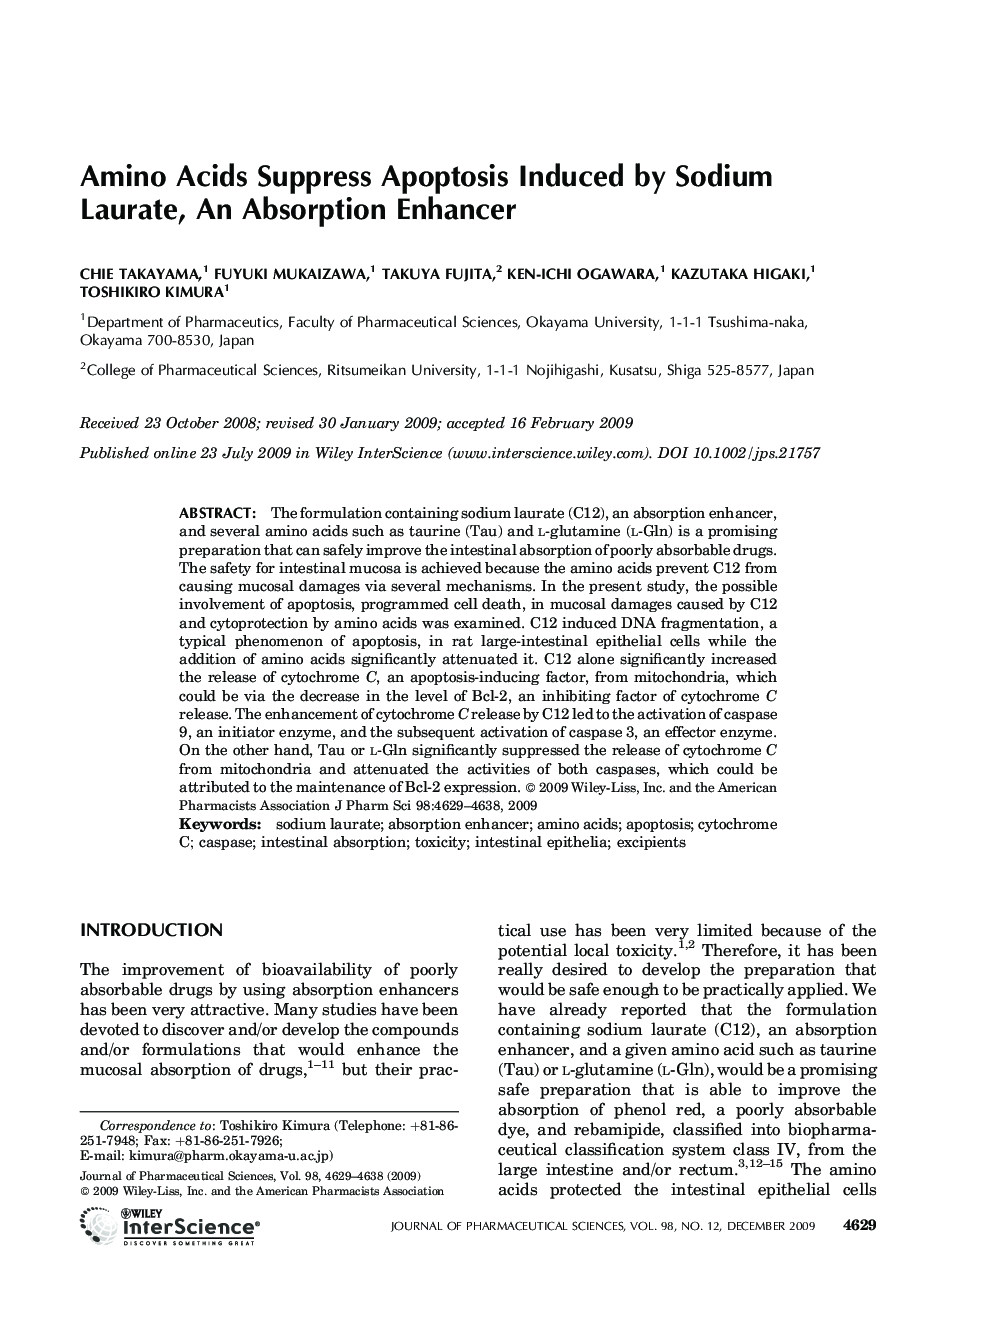 Amino acids suppress apoptosis induced by sodium laurate, an absorption enhancer